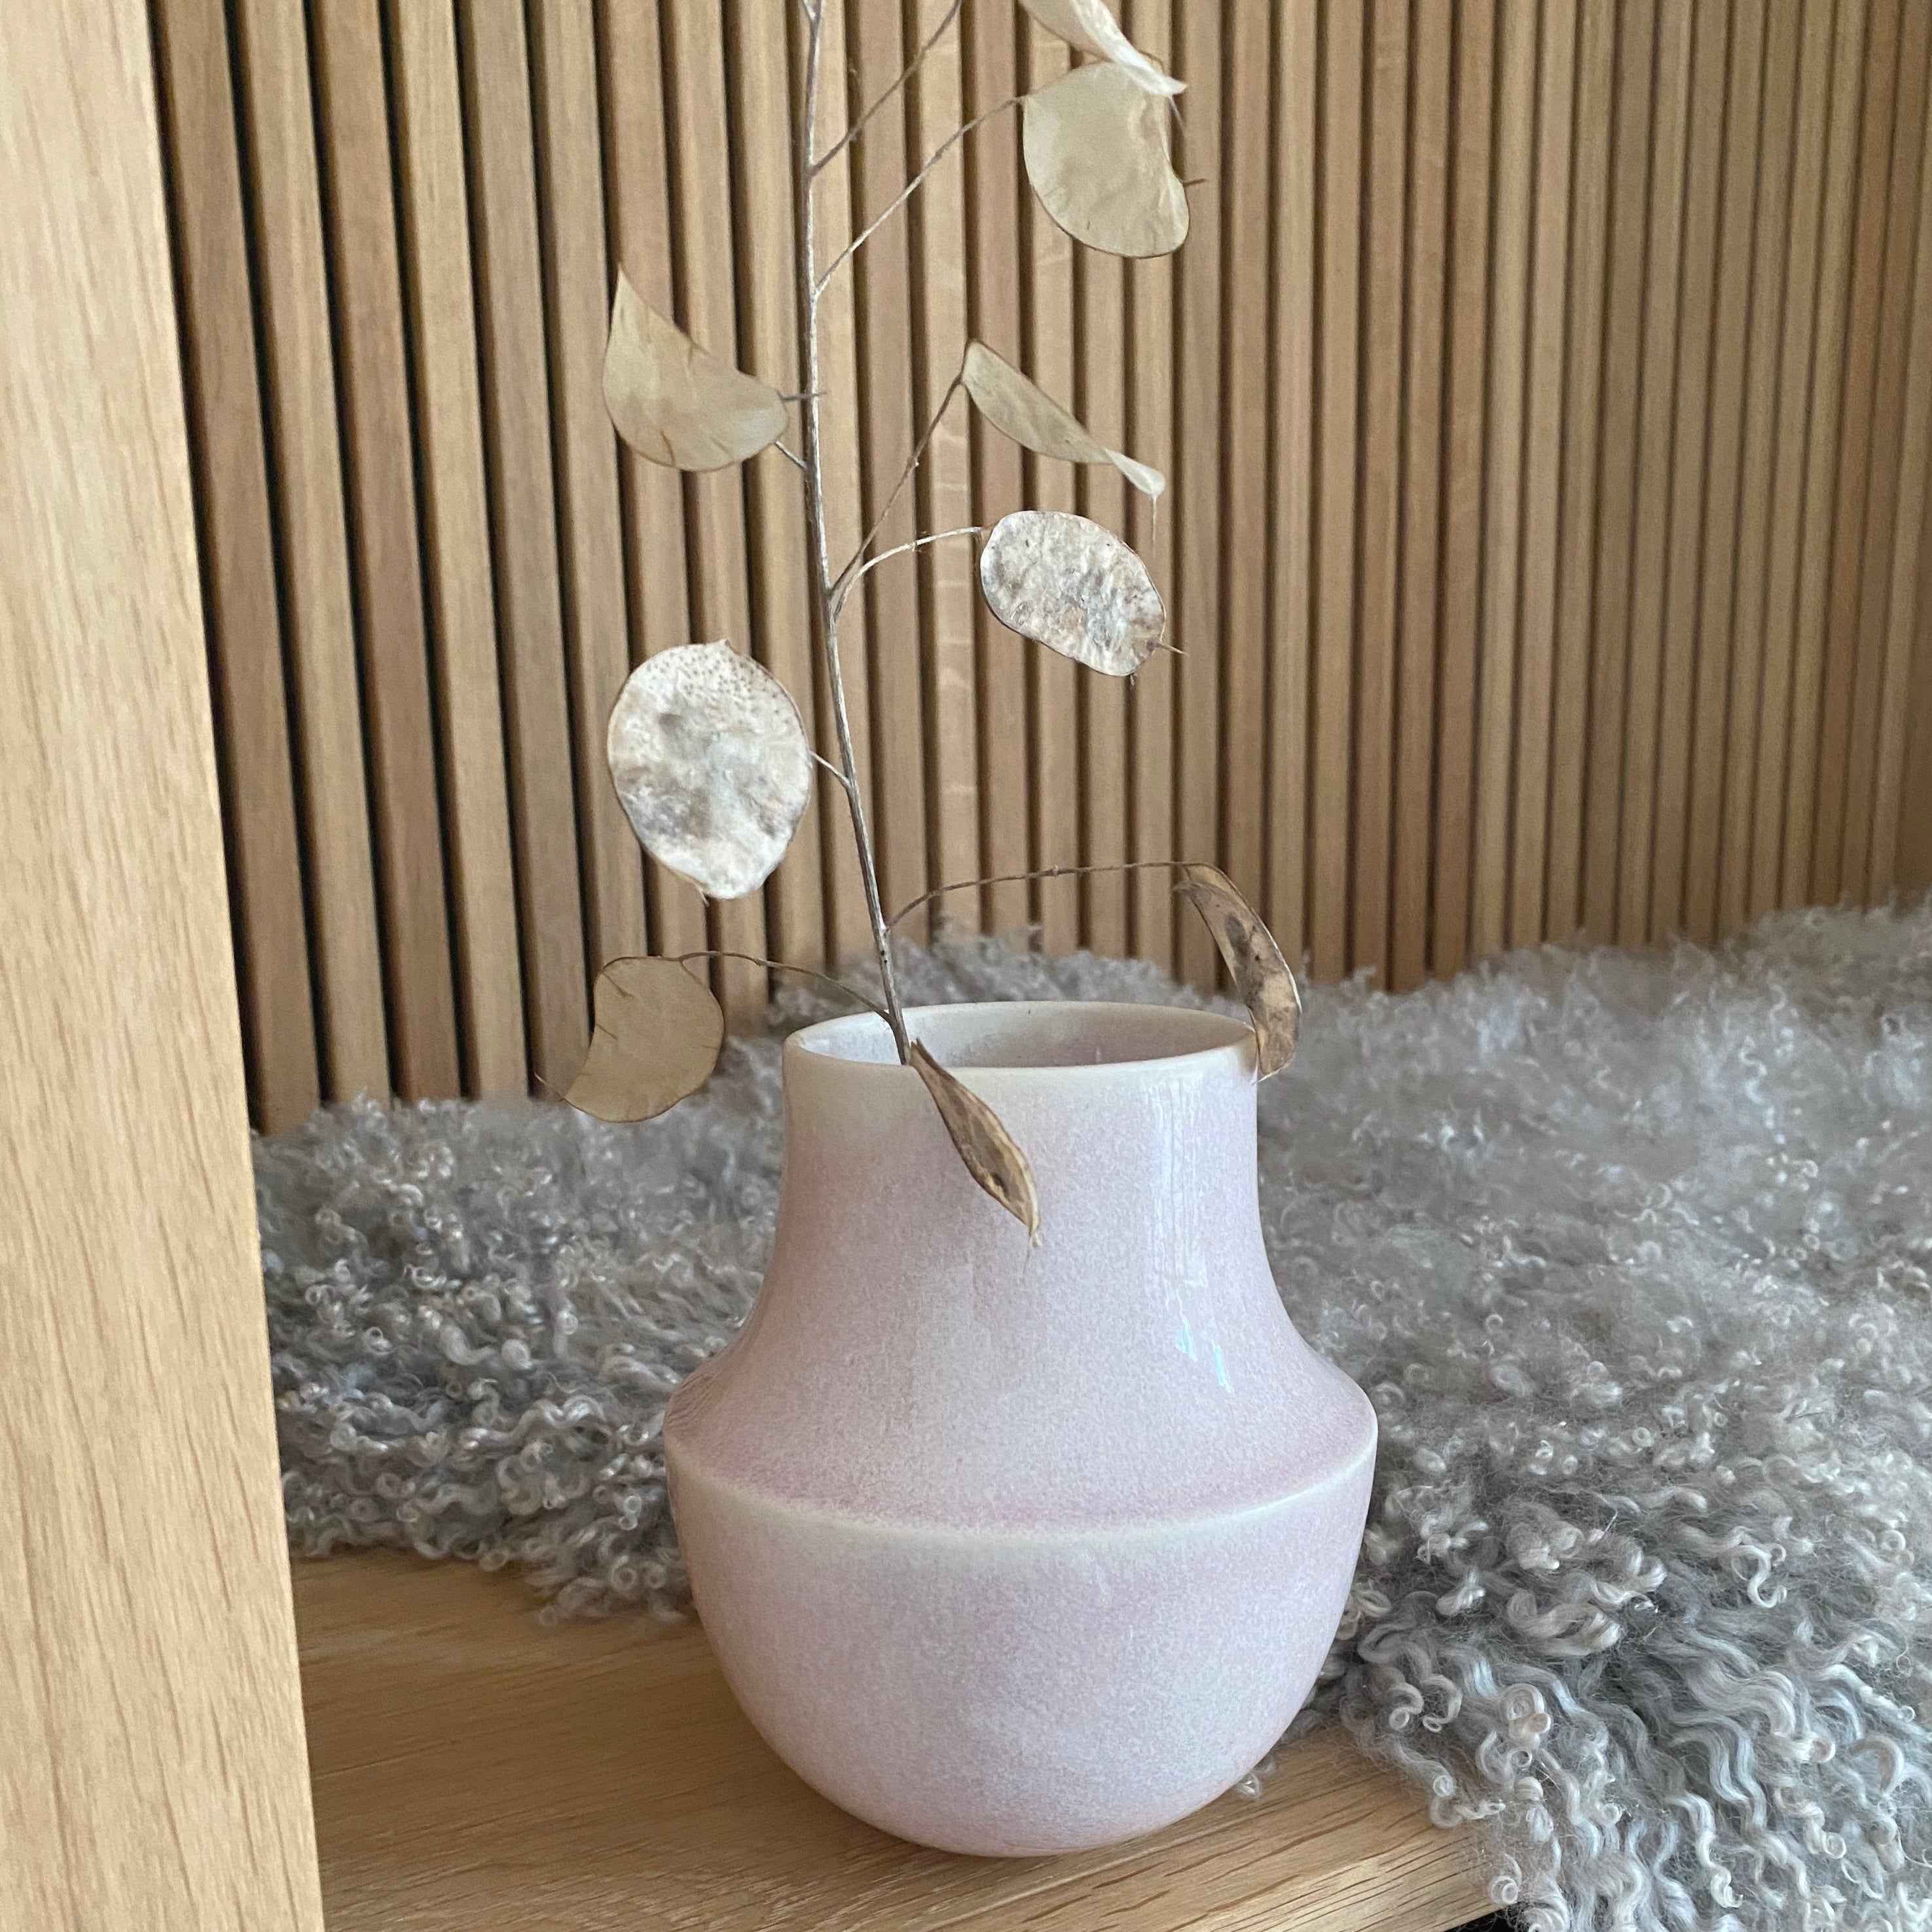 Thora Project's vase, pale pink